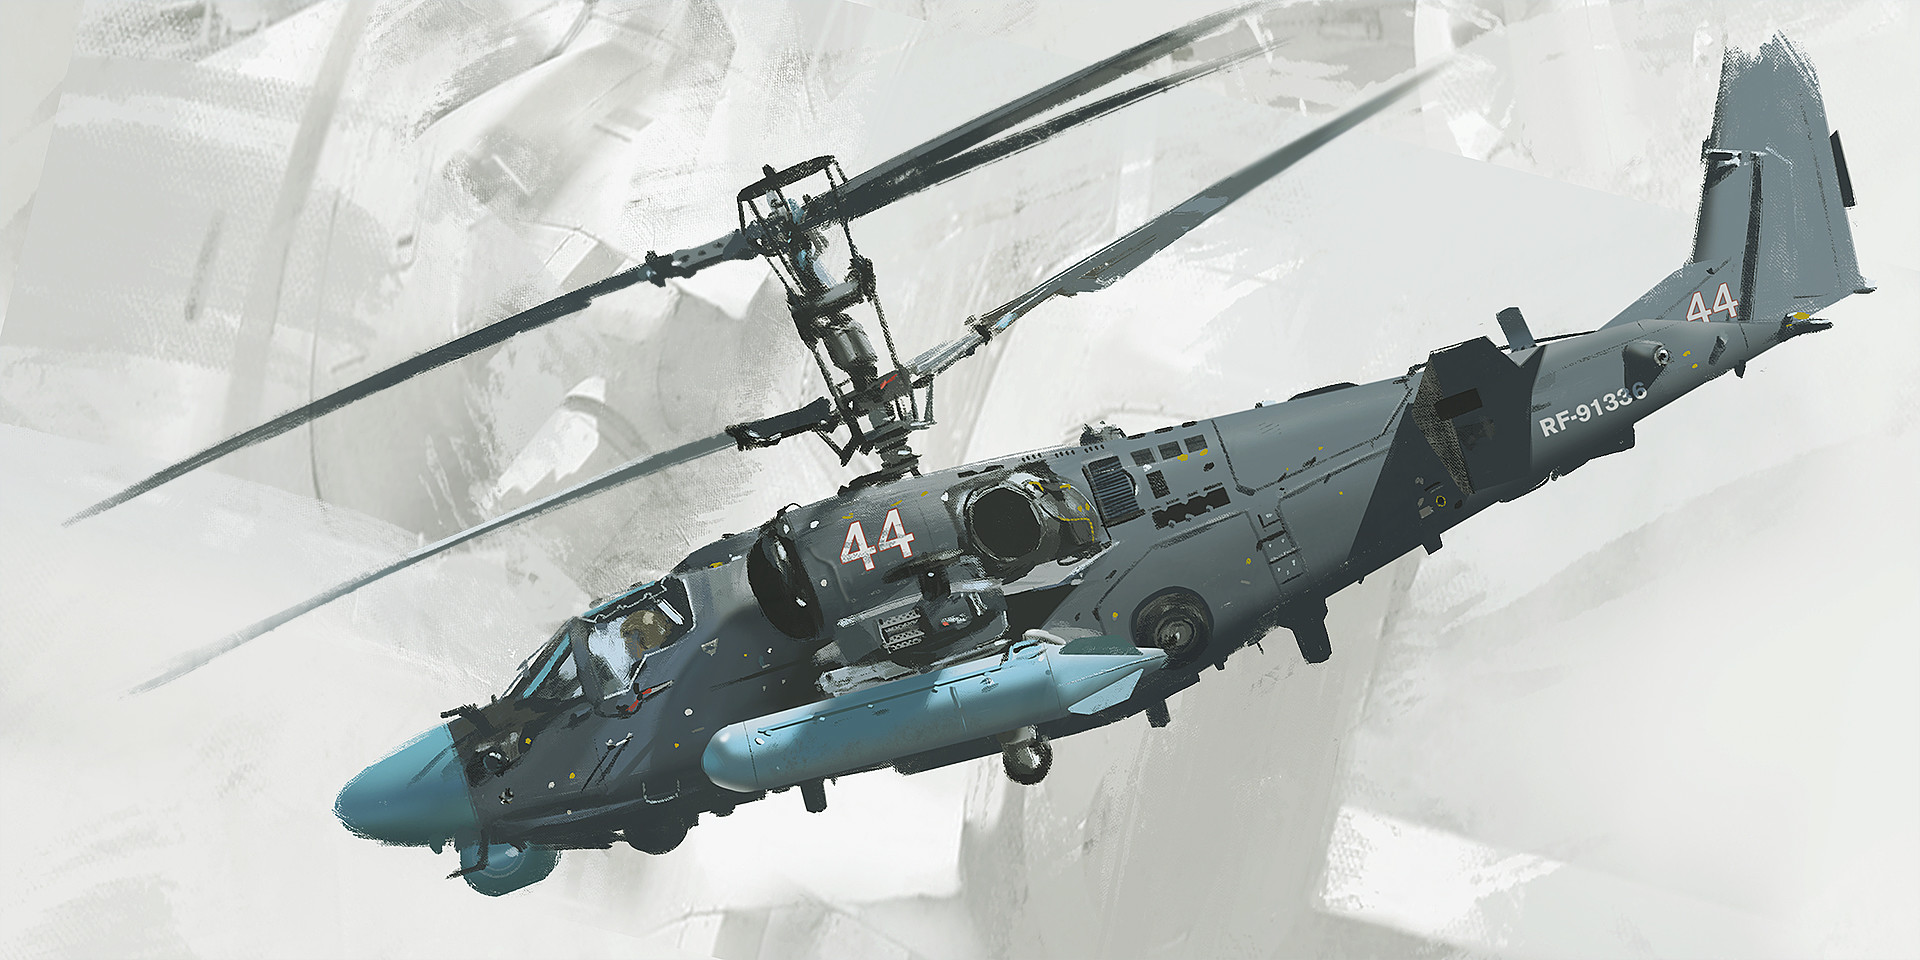 General 1920x960 vehicle white background helicopters concept art Joe Gloria aircraft military aircraft military attack helicopters Kamov Ka-52 Russian Army military vehicle